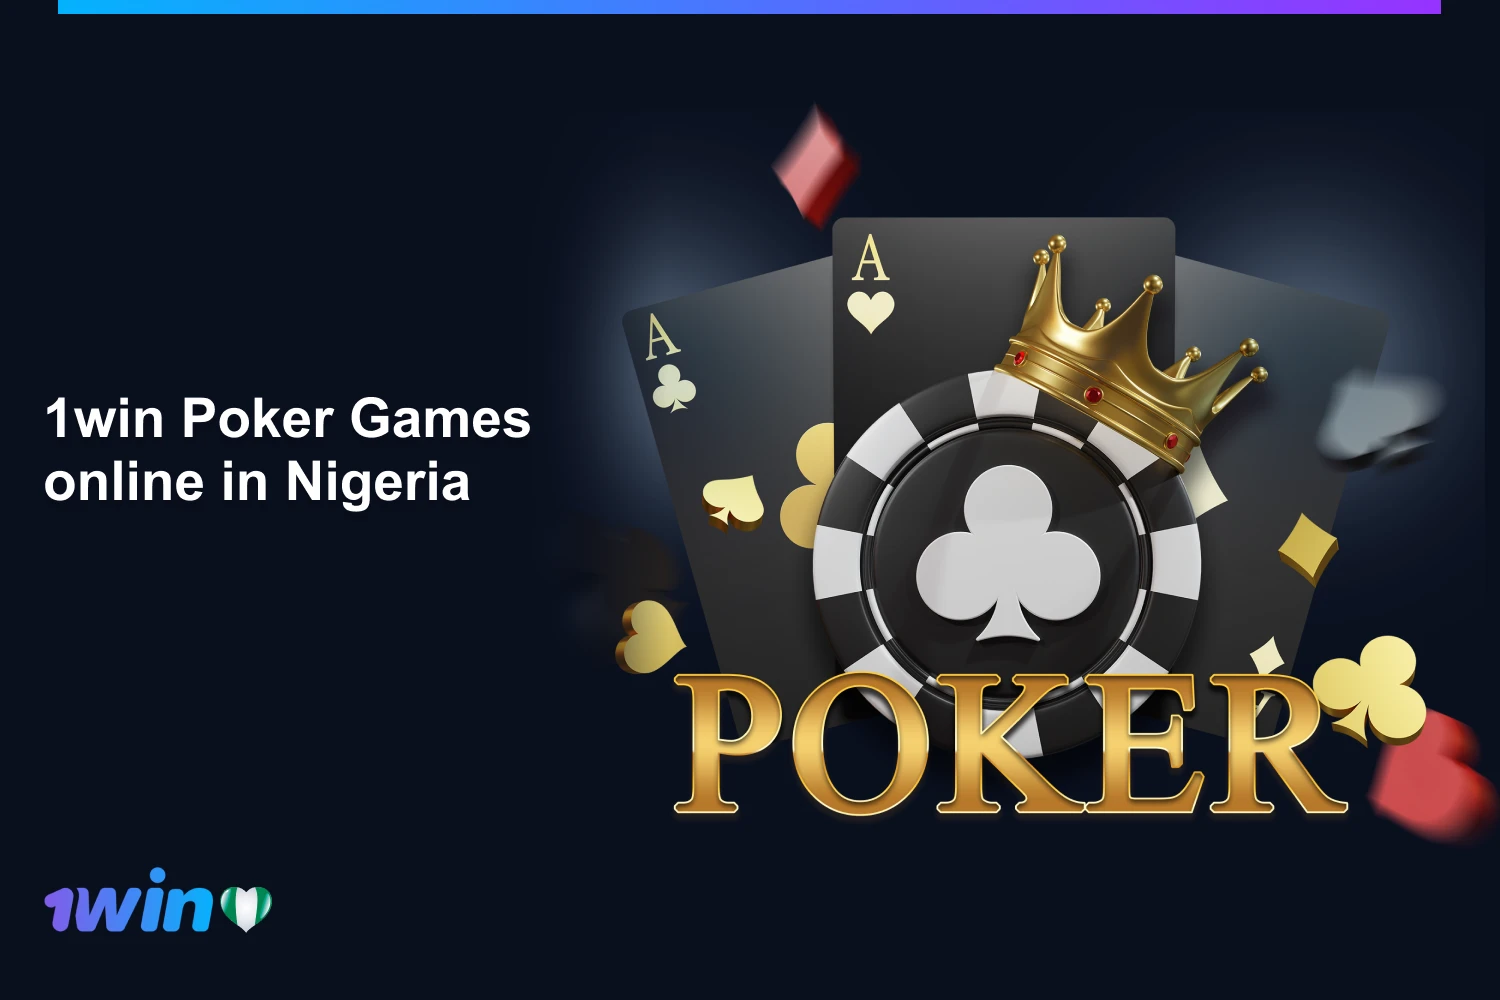 Nigerian players have a great opportunity to play over 350 exciting variations of 1win poker